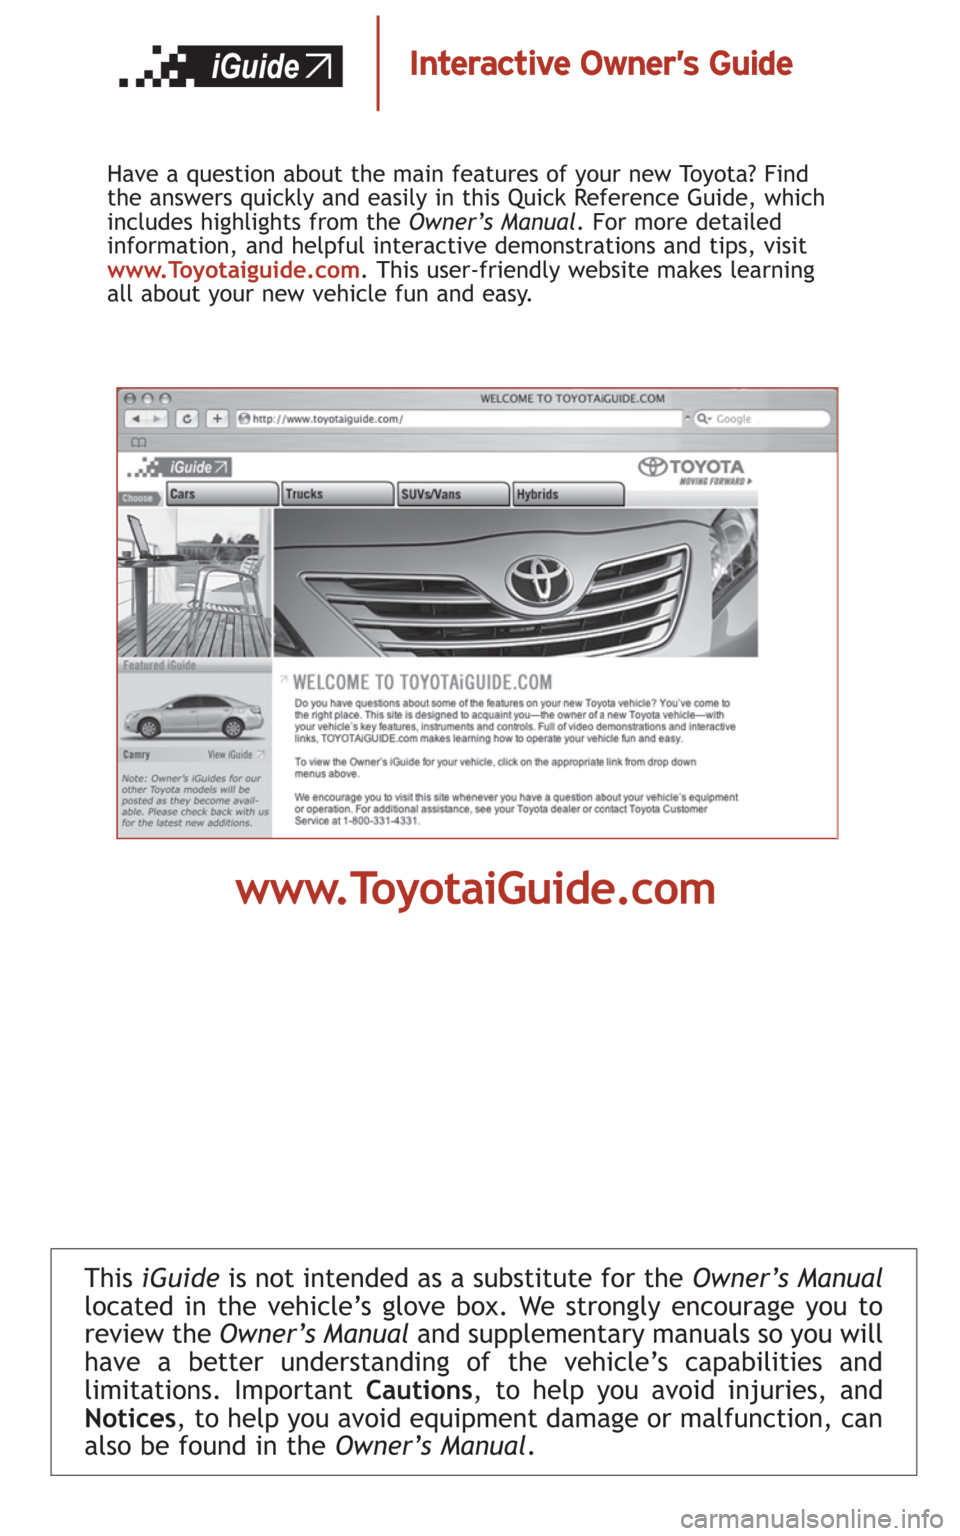 TOYOTA CAMRY 2008 XV40 / 8.G Quick Reference Guide This iGuideis not intended as a substitute for theOwner’s Manual
located in the vehicle’s glove box. We strongly encourage you to
review theOwner’s Manual and supplementary manuals so you will
h